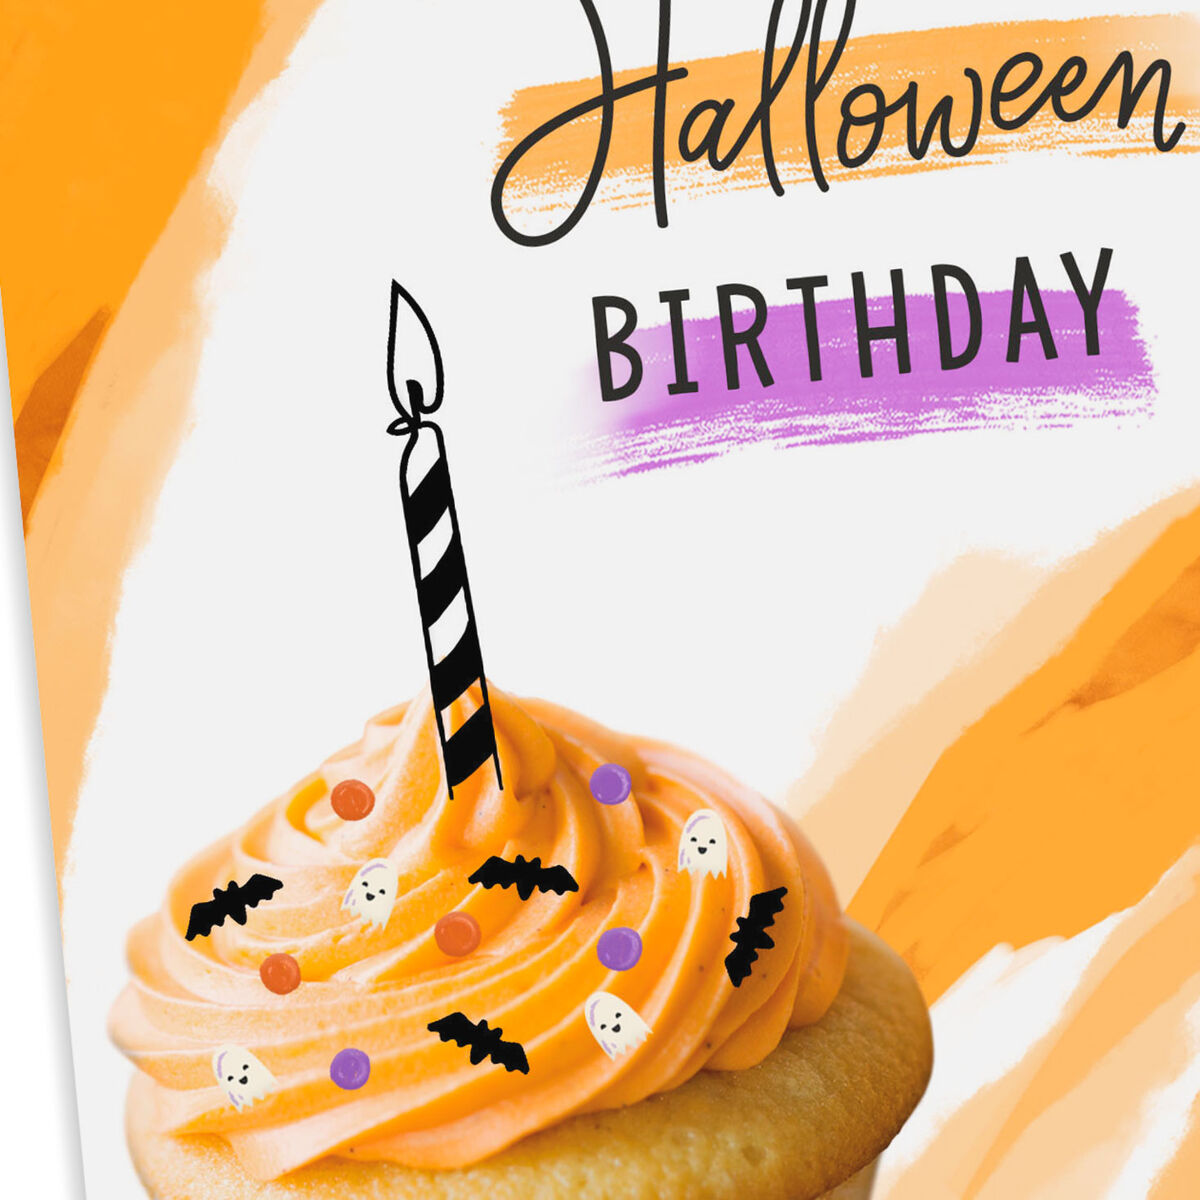 Candy, Cake and Celebrating Halloween Birthday Card - Greeting Cards ...